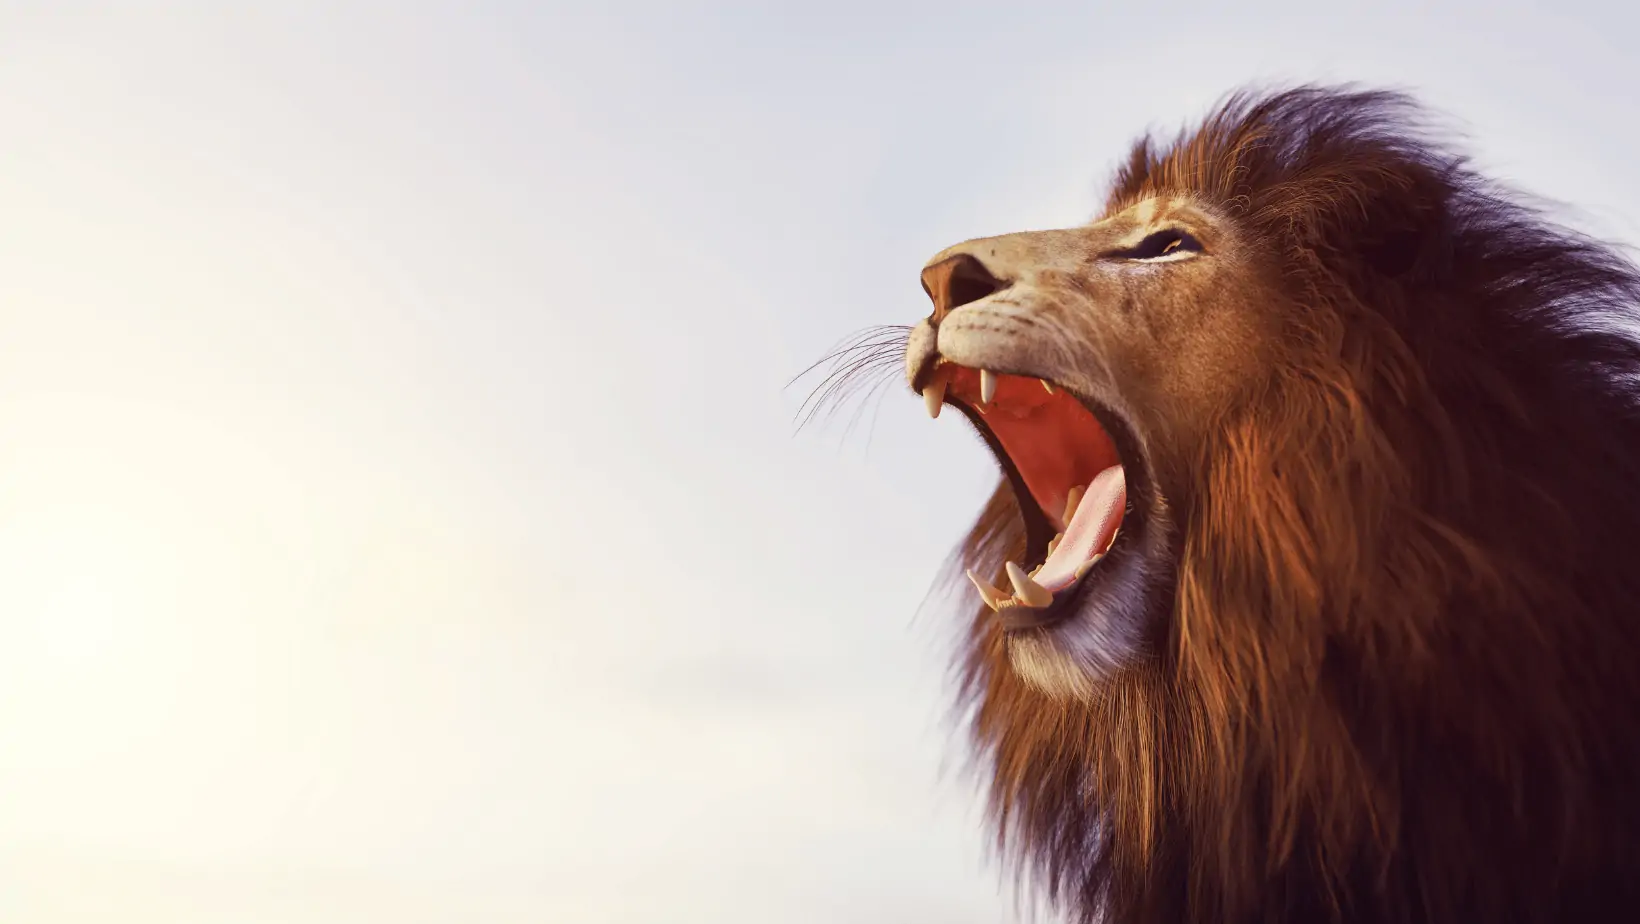 Gauteng Singing Talent Invited to Audition for Lion King Theatre Production